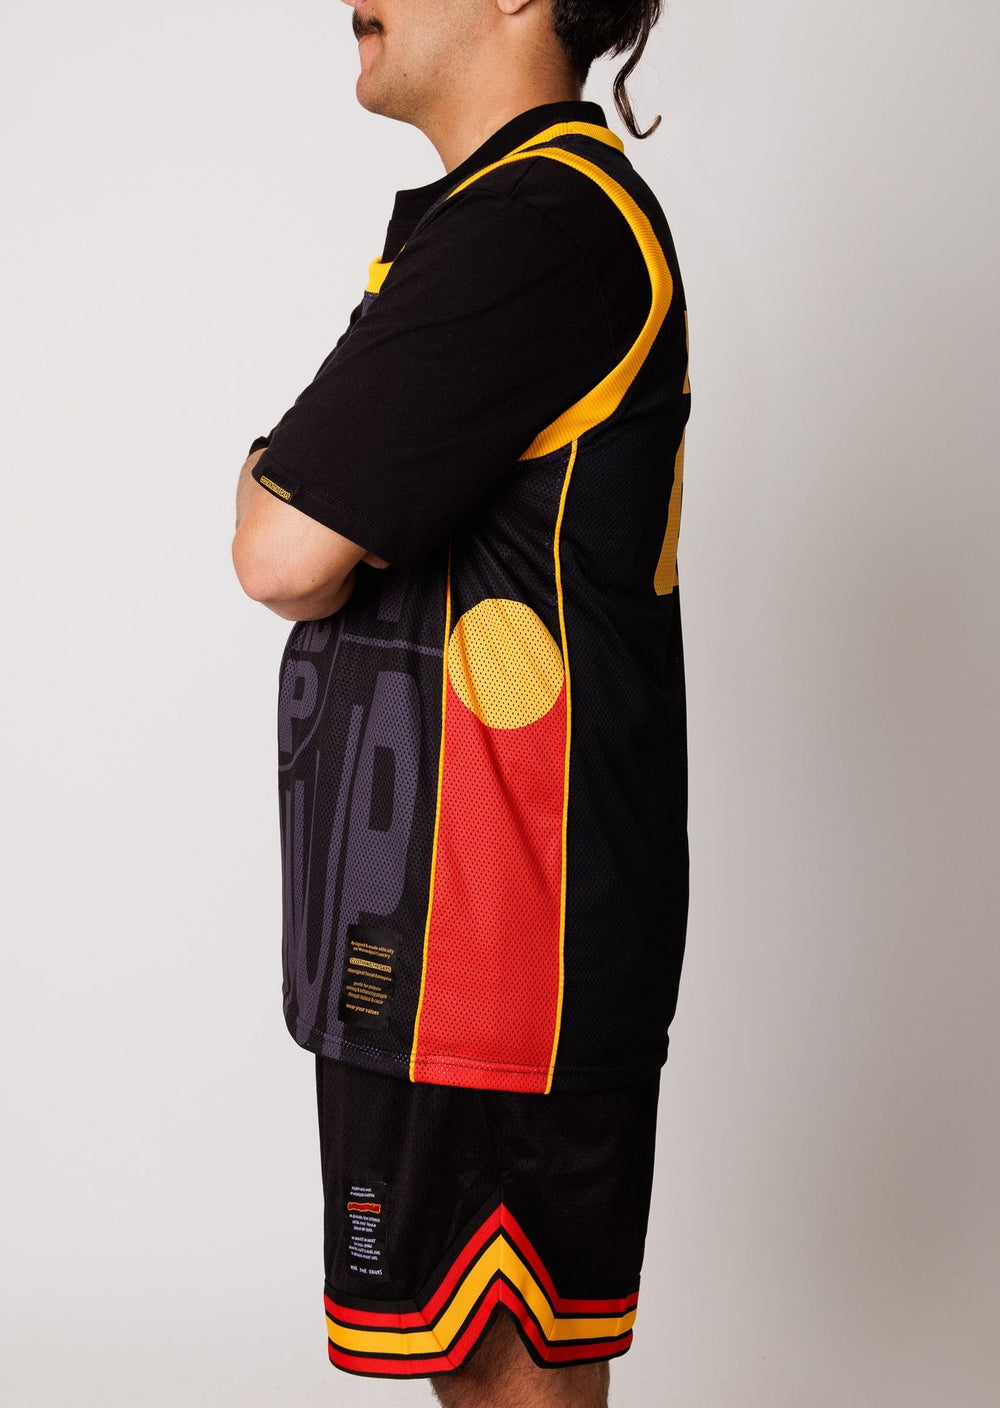 Clothing The Gaps. Get Up! Stand Up! Show Up! Basketball Jersey. Featuring a sublimated design with a black background and 'Get Up! Stand Up! Show Up!' on a contrasting dark grey on front of singlet. Aboriginal flags done the side panel. Yellow piping and knitted bands around arms and neck. Bold yellow pocket sized 22 on left corner of front. On Back of jersey is 22 in yellow big in centre.